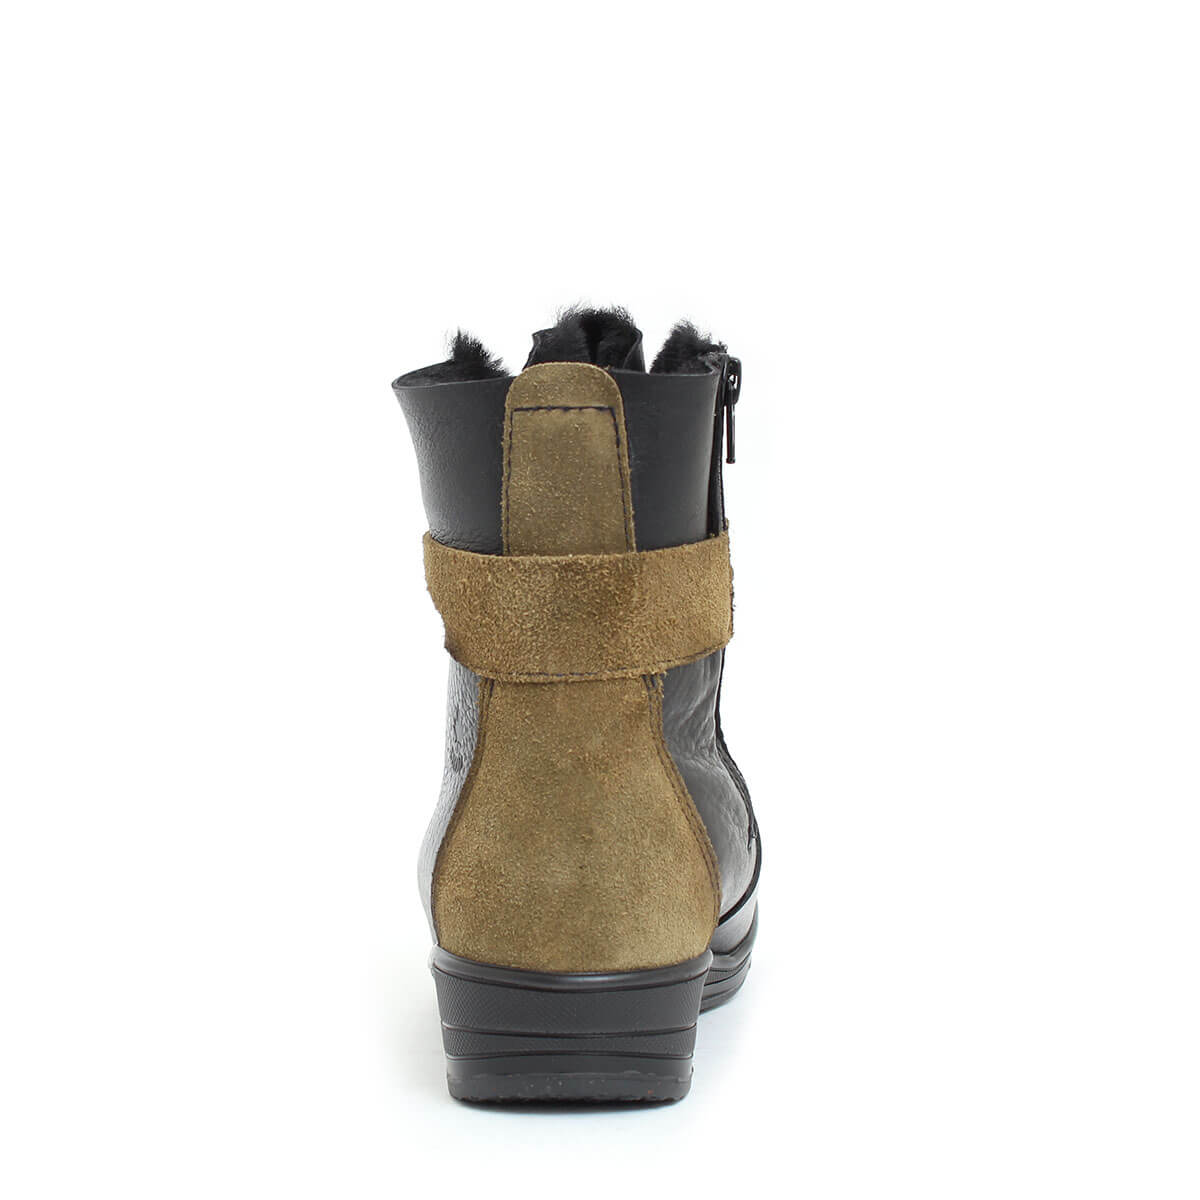 Maria winter Boot for Women